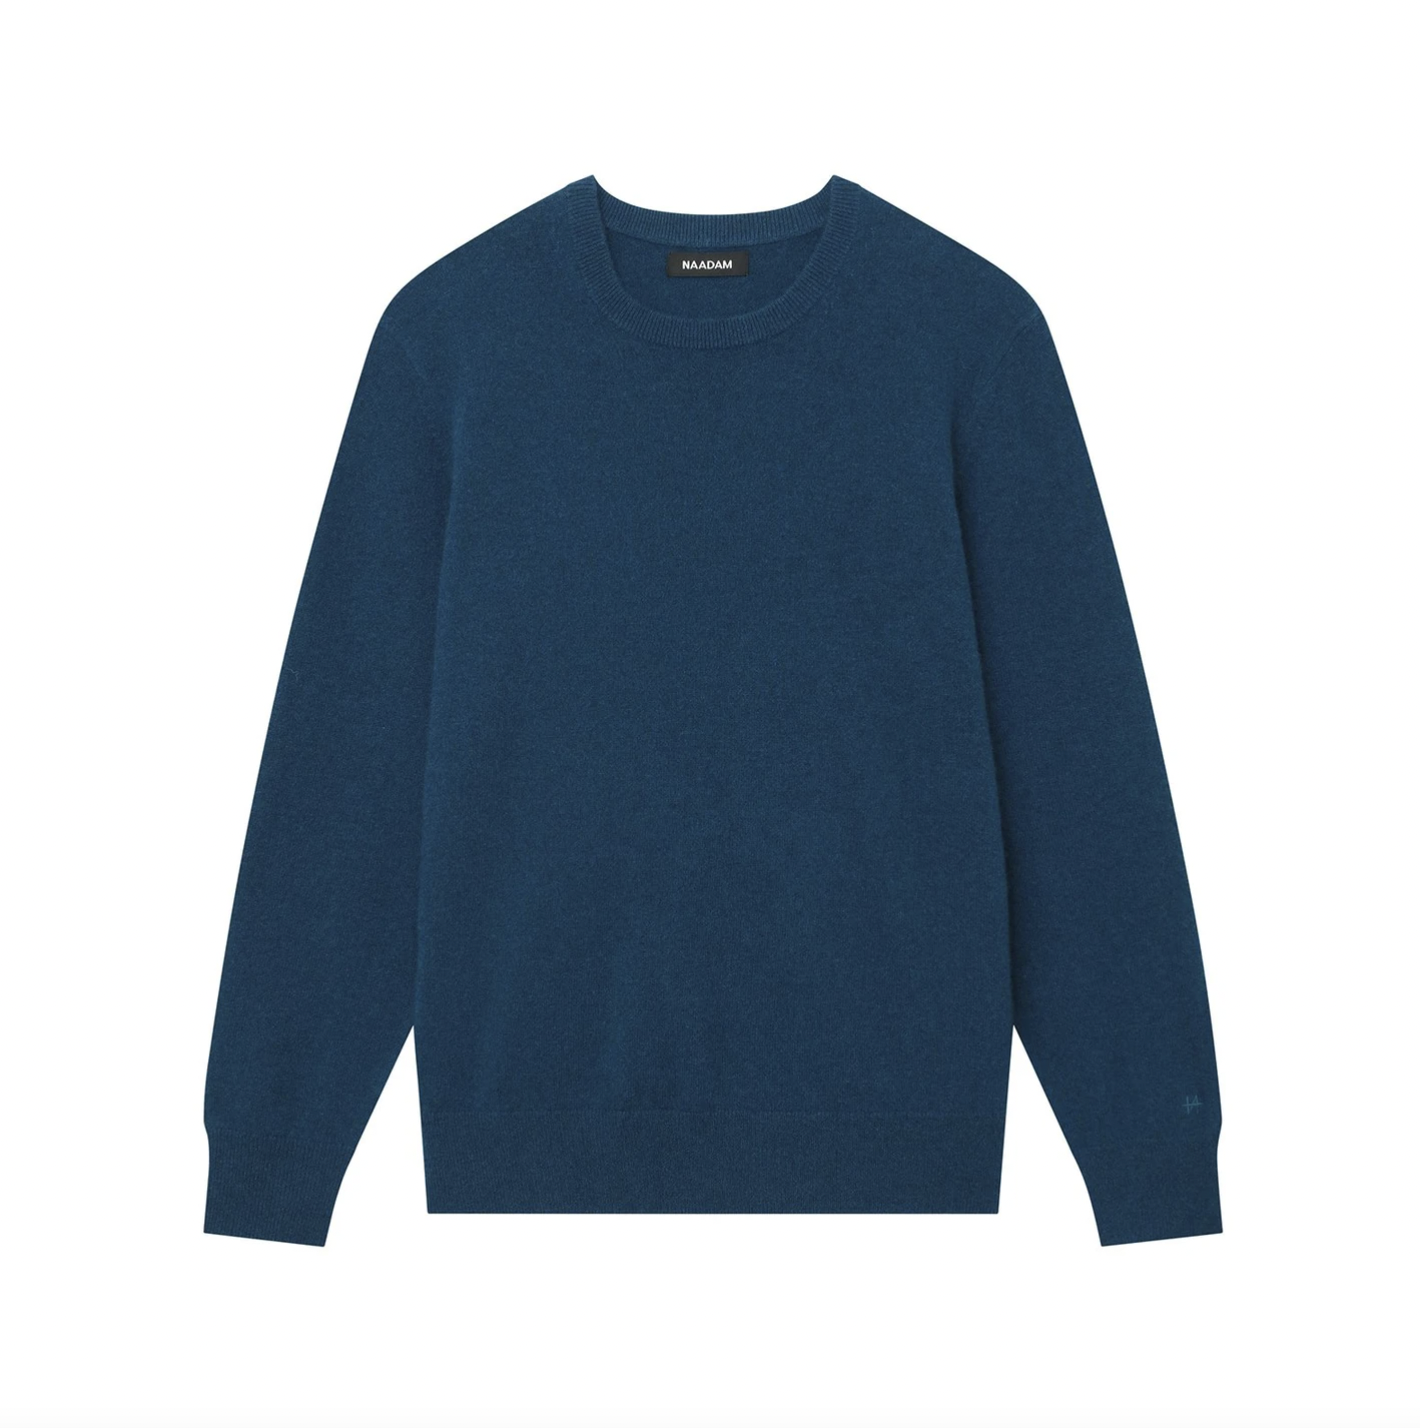 Best Cheap Sweaters for Men    Cool Men's Sweaters Under $